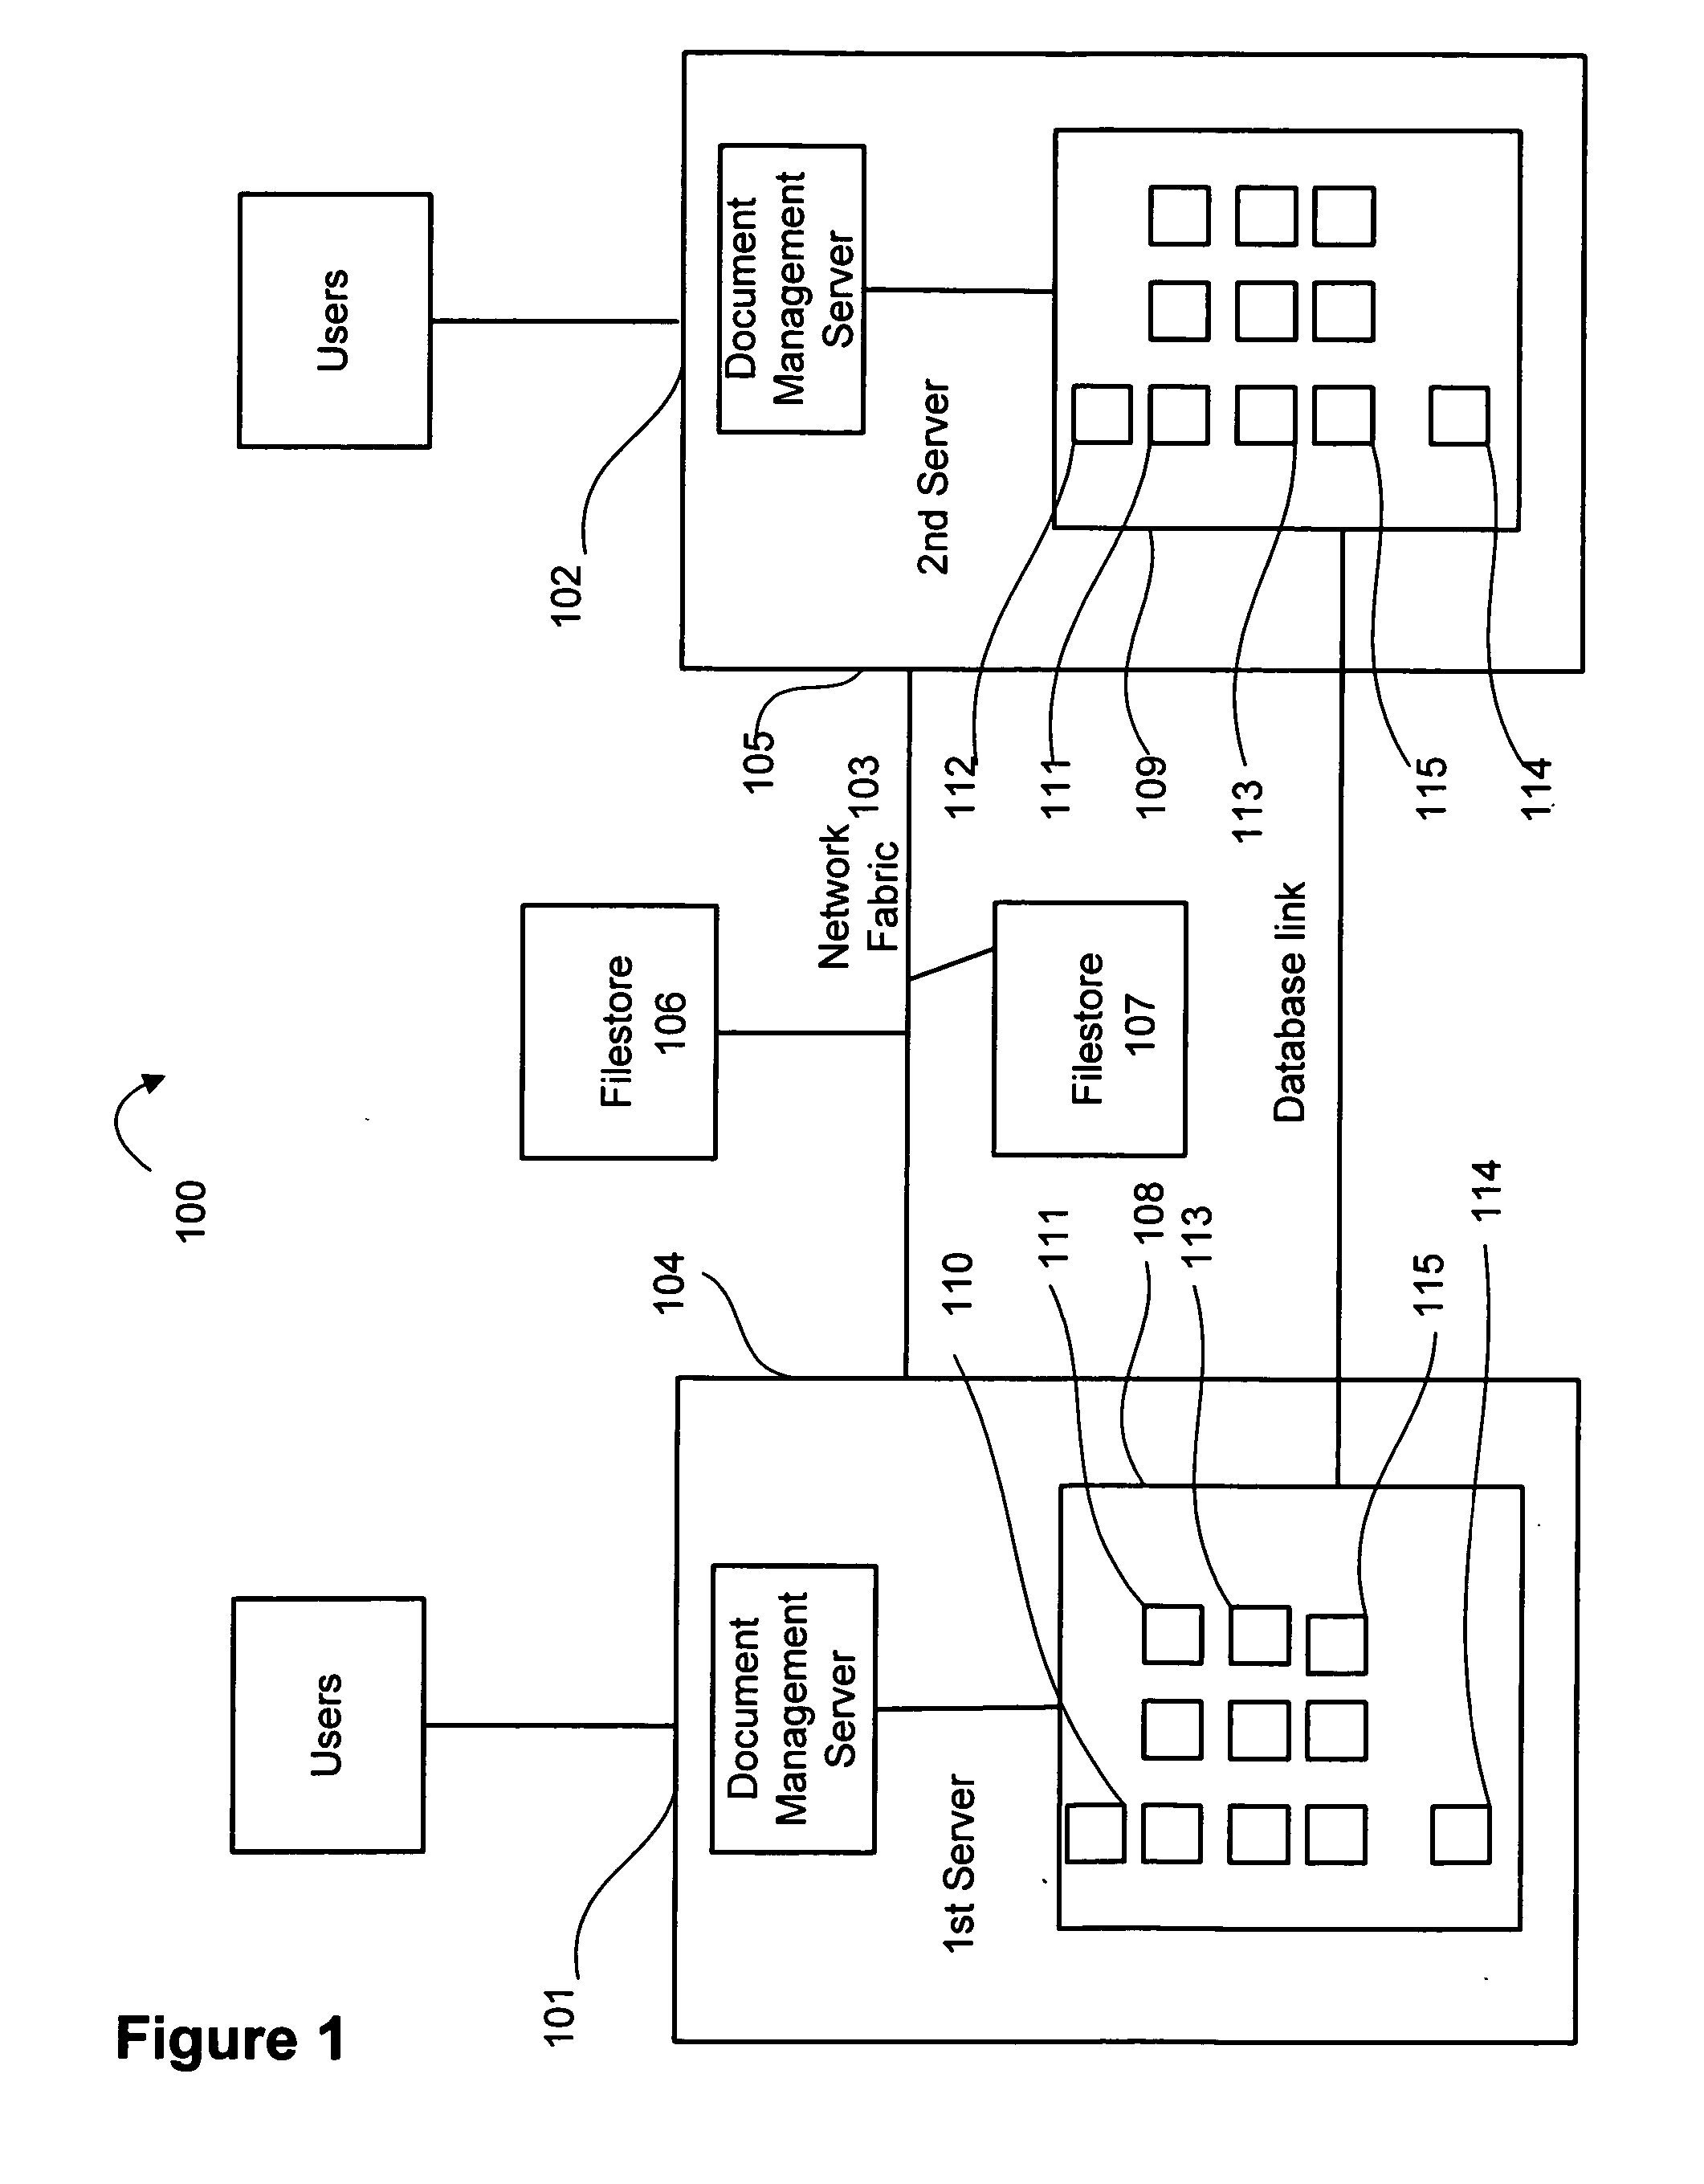 Method for preserving access to system in case of disaster